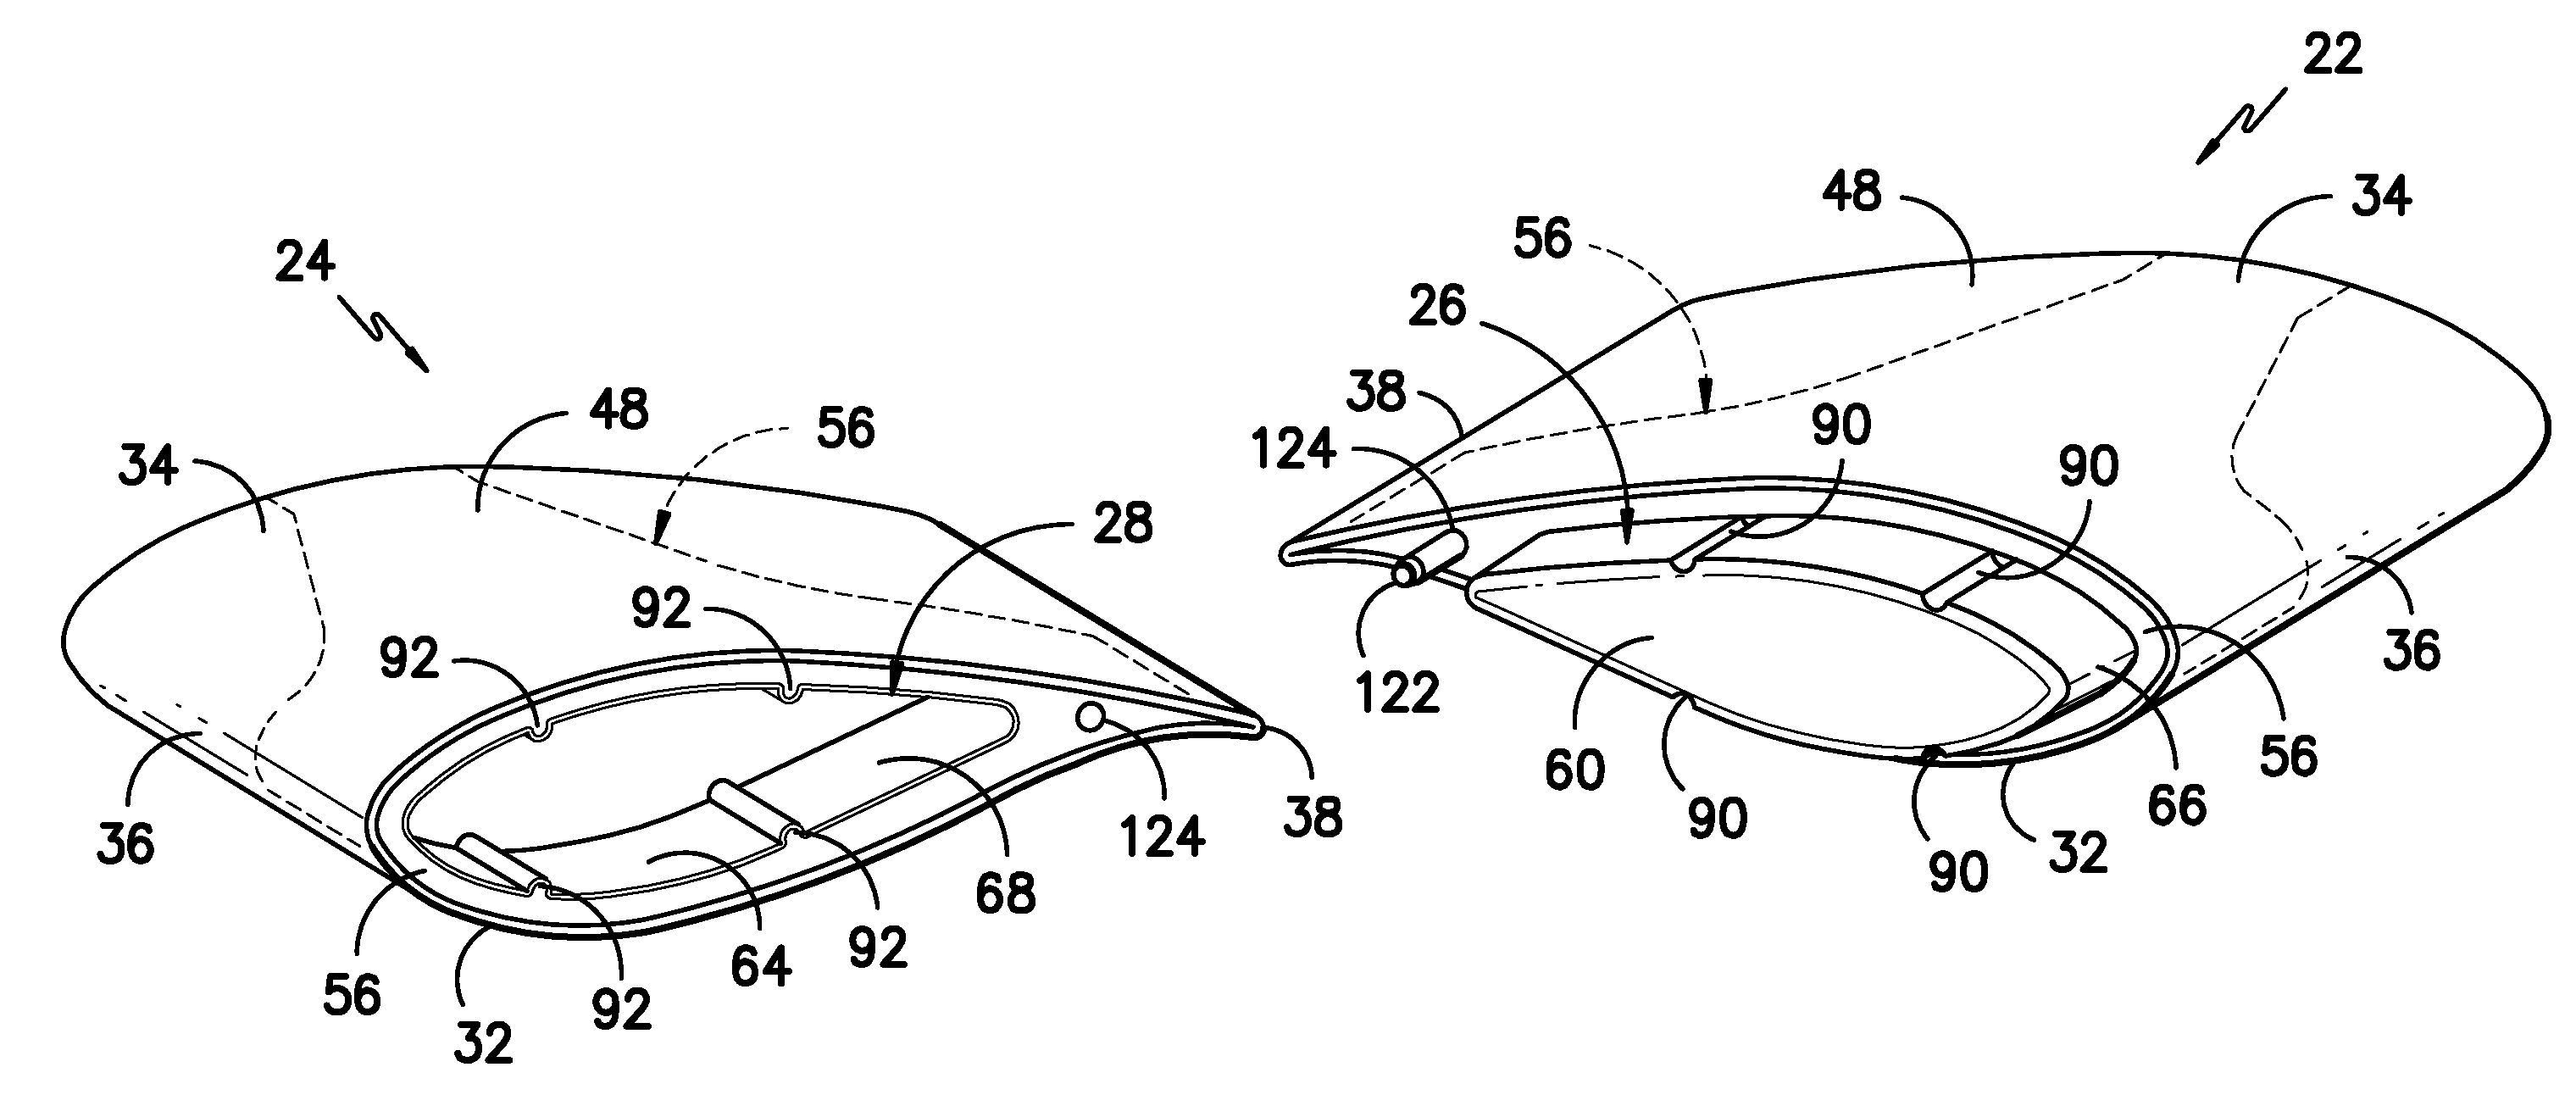 Joint design for rotor blade segments of a wind turbine